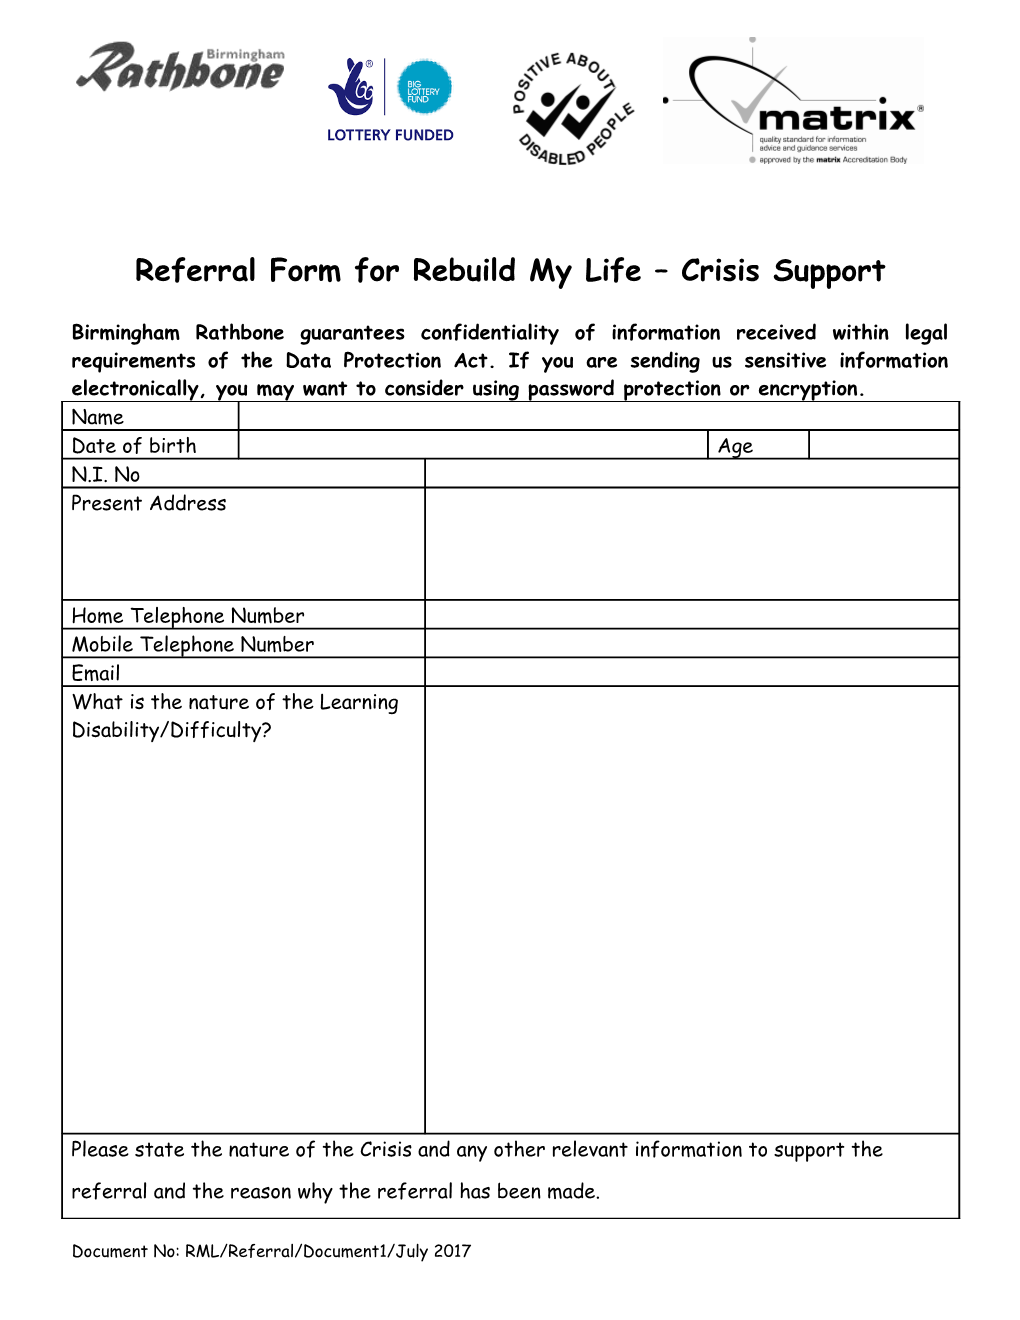 Referral Form for Rebuild My Life Crisis Support